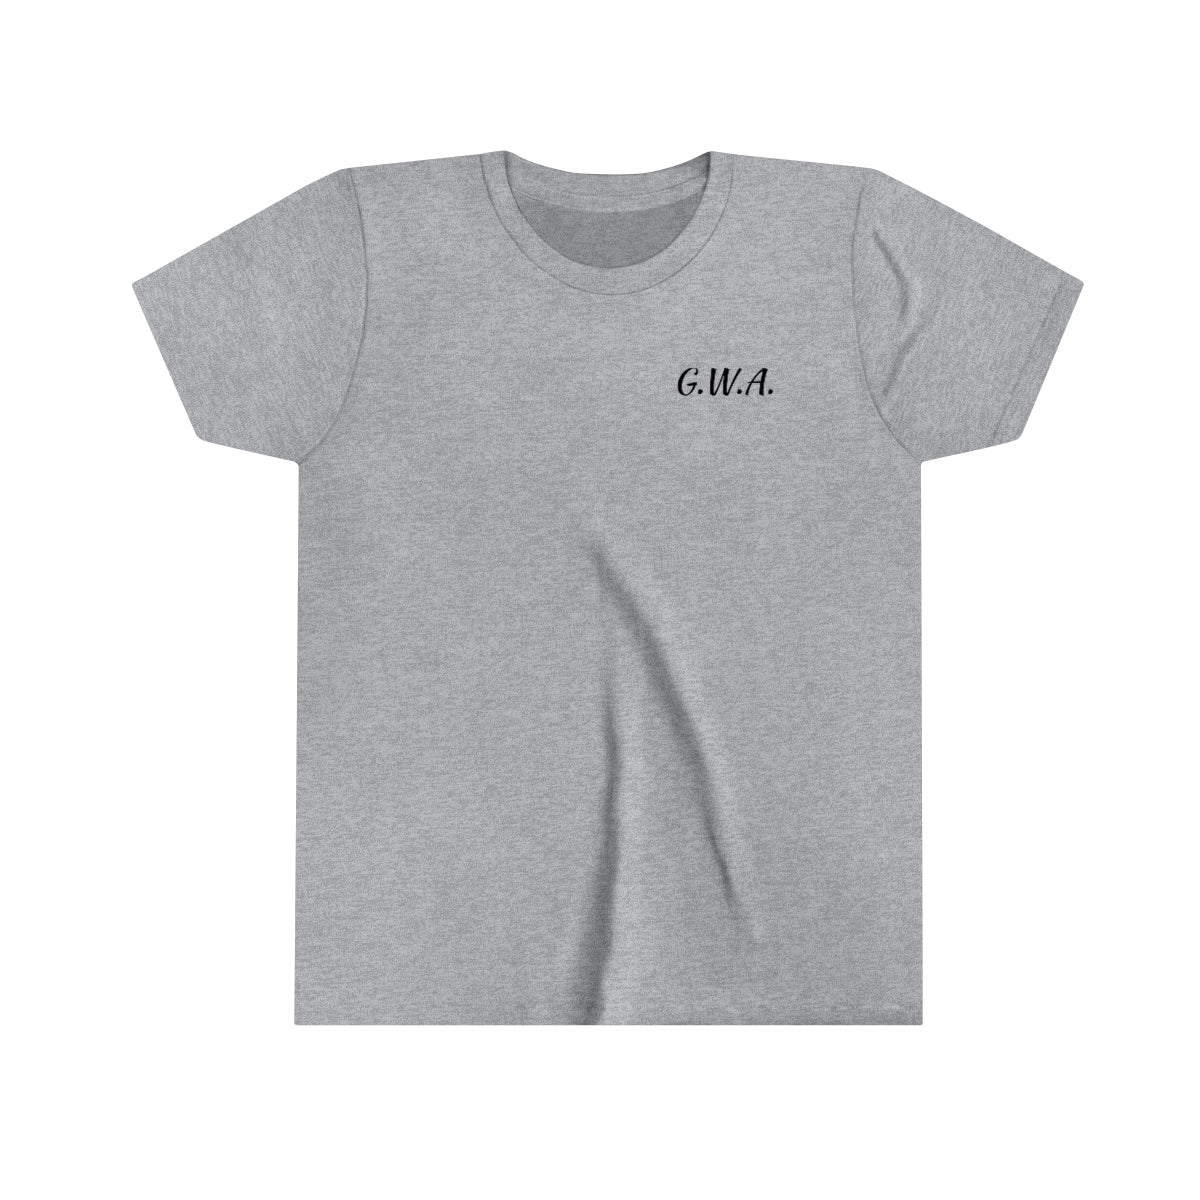 SWING FIRST Youth Short Sleeve Tee KIDS